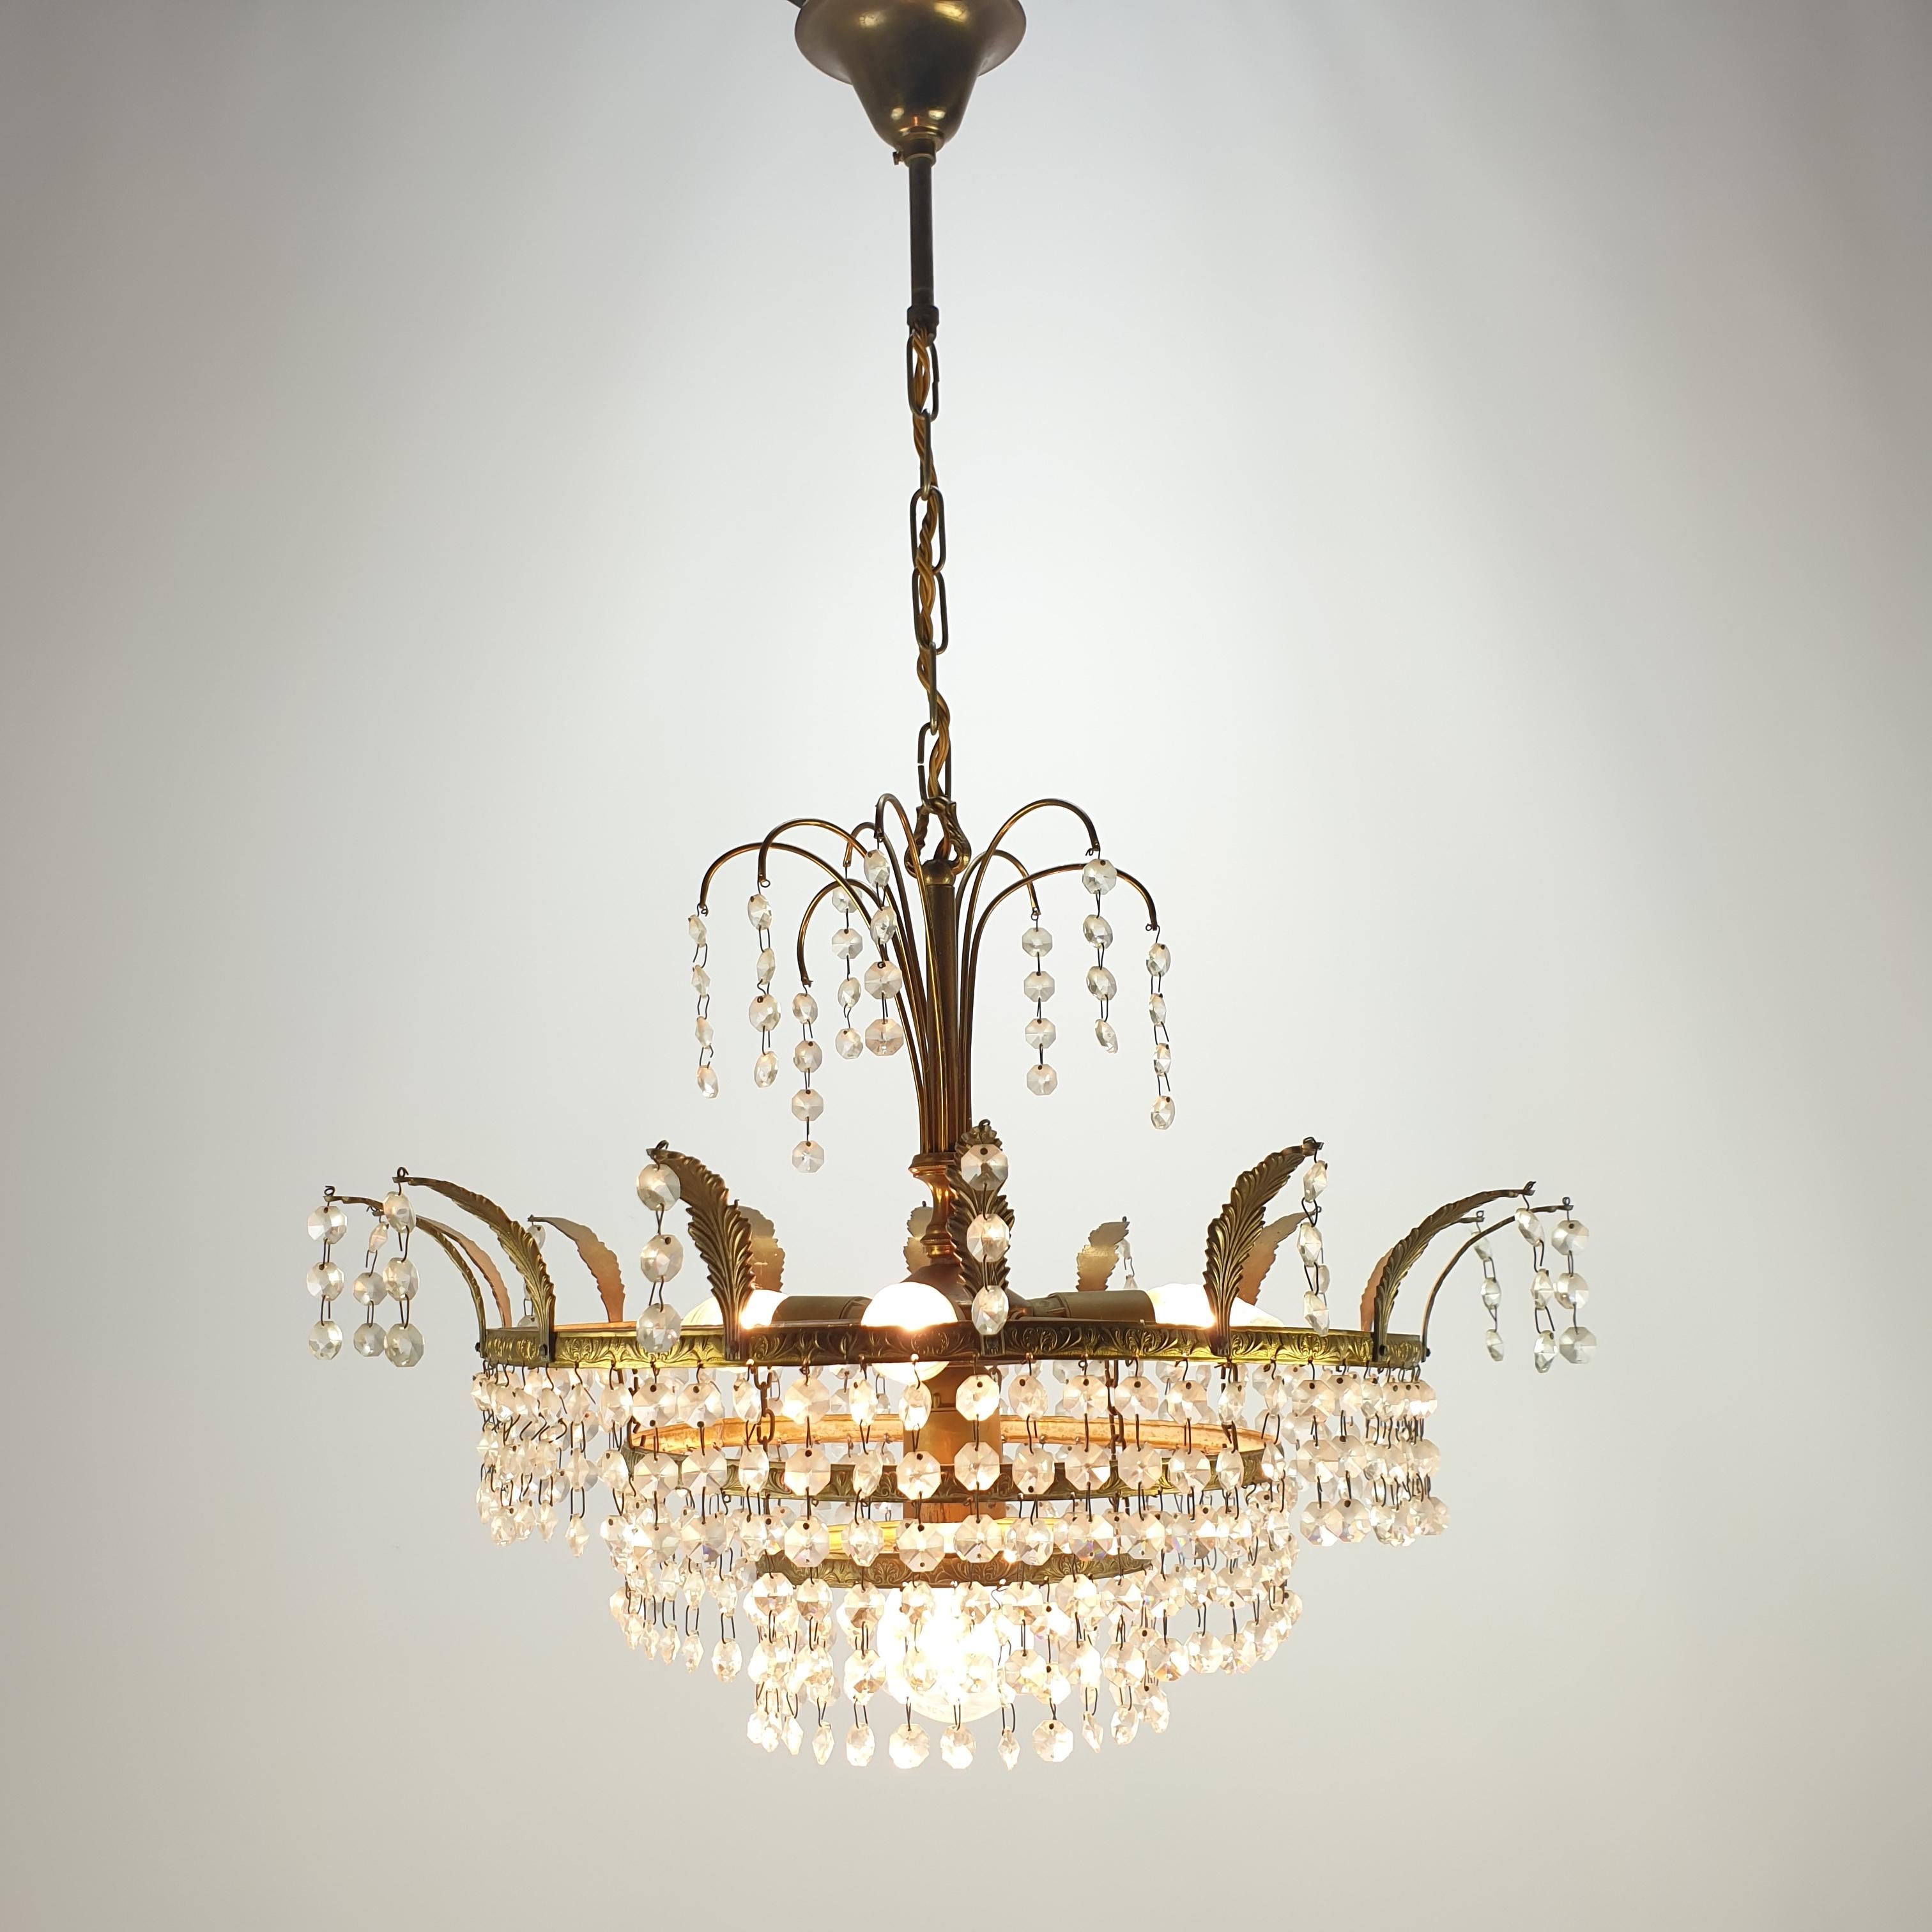 Charming French Empire-style crystal glass and brass chandelier from the 1920s.

This lovely piece has an ornate bronze frame hung with prisms of crystal glass. 
The crystal glass prisms create a sparkling effect and reflect elegance which is sure